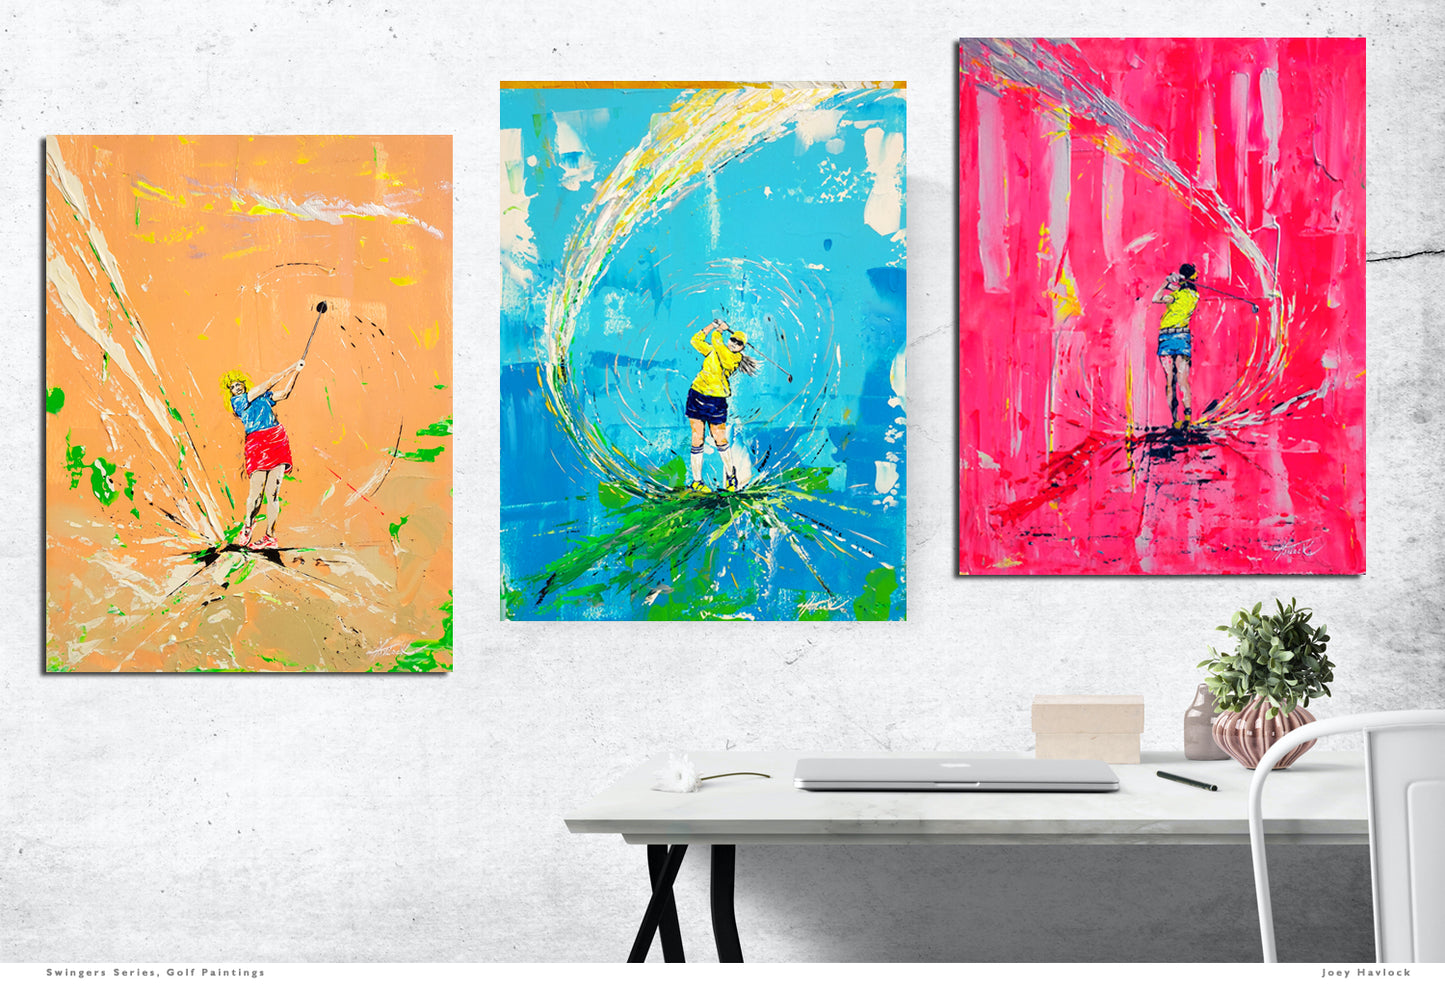 INTO THE MYSTIC - Metal Print, Limited Edition 9" x 12" - SWINGERS - Impressionist Golf Series by Joey Havlock